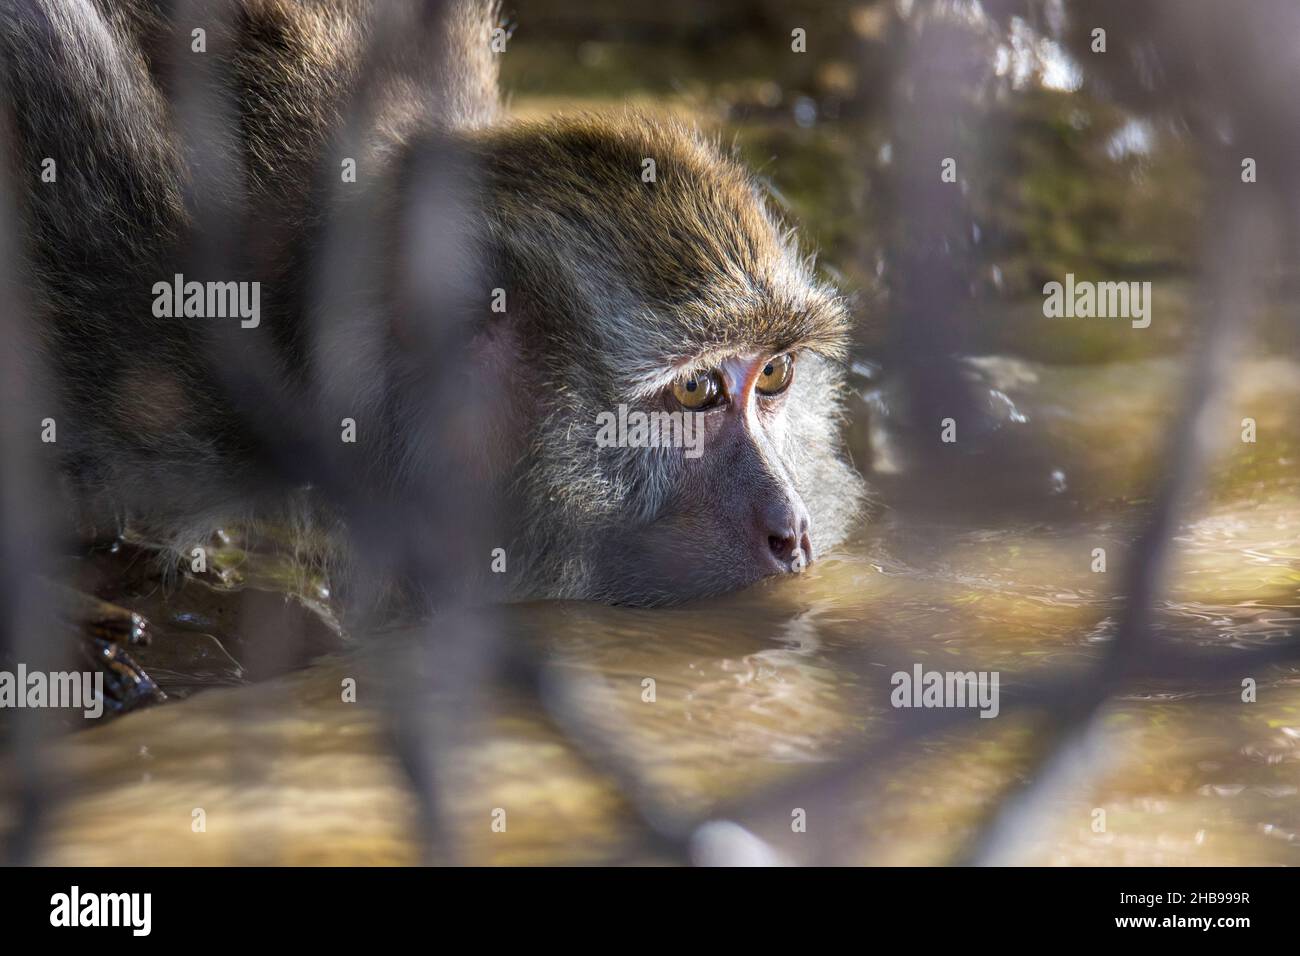 Long tialed macaque drinking water in the river, Borneo Malaysia Stock Photo